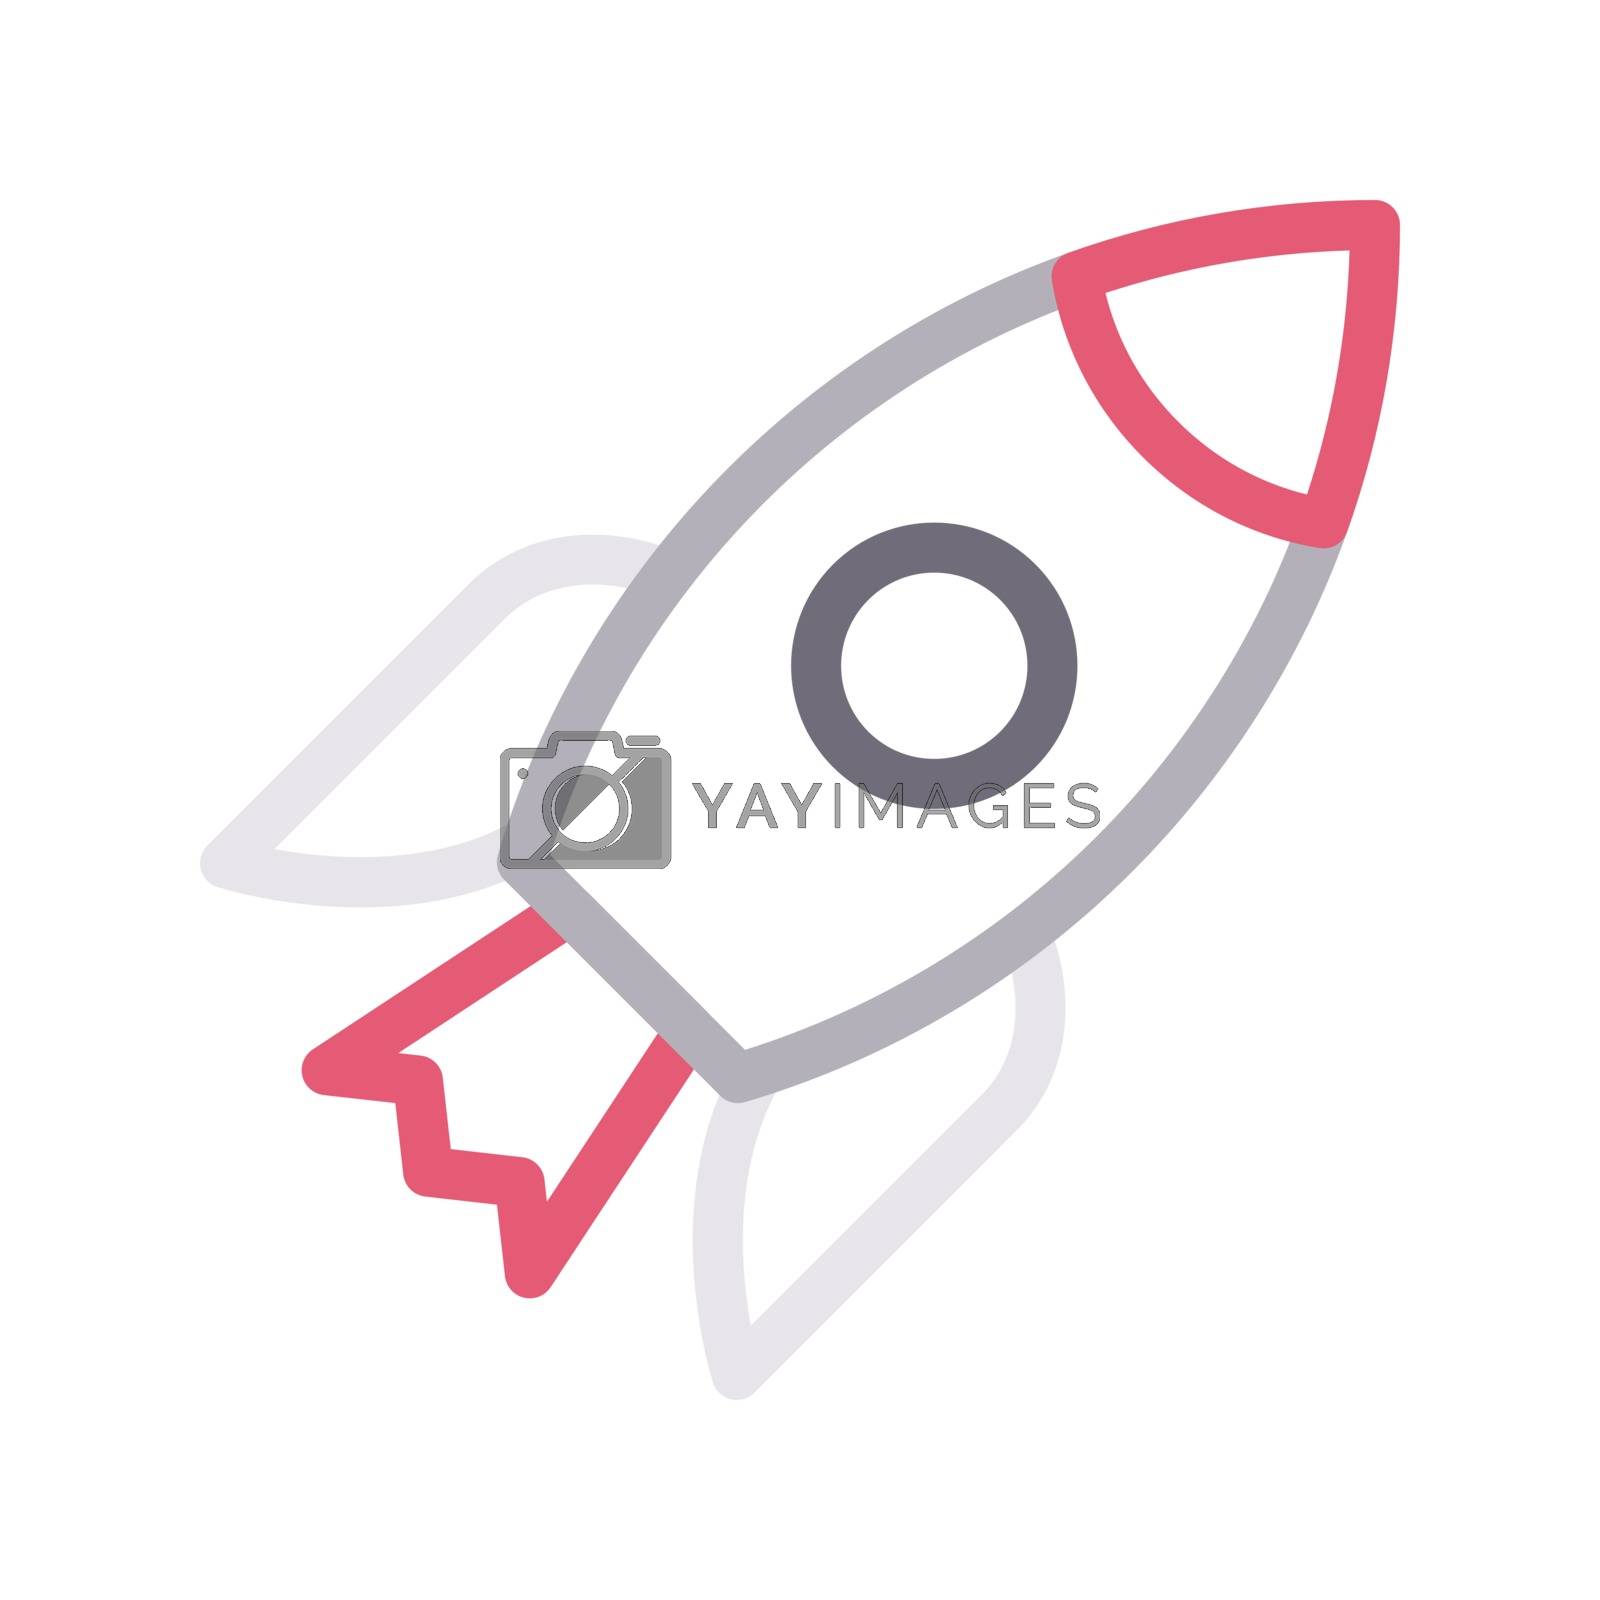 Royalty free image of rocket  by vectorstall